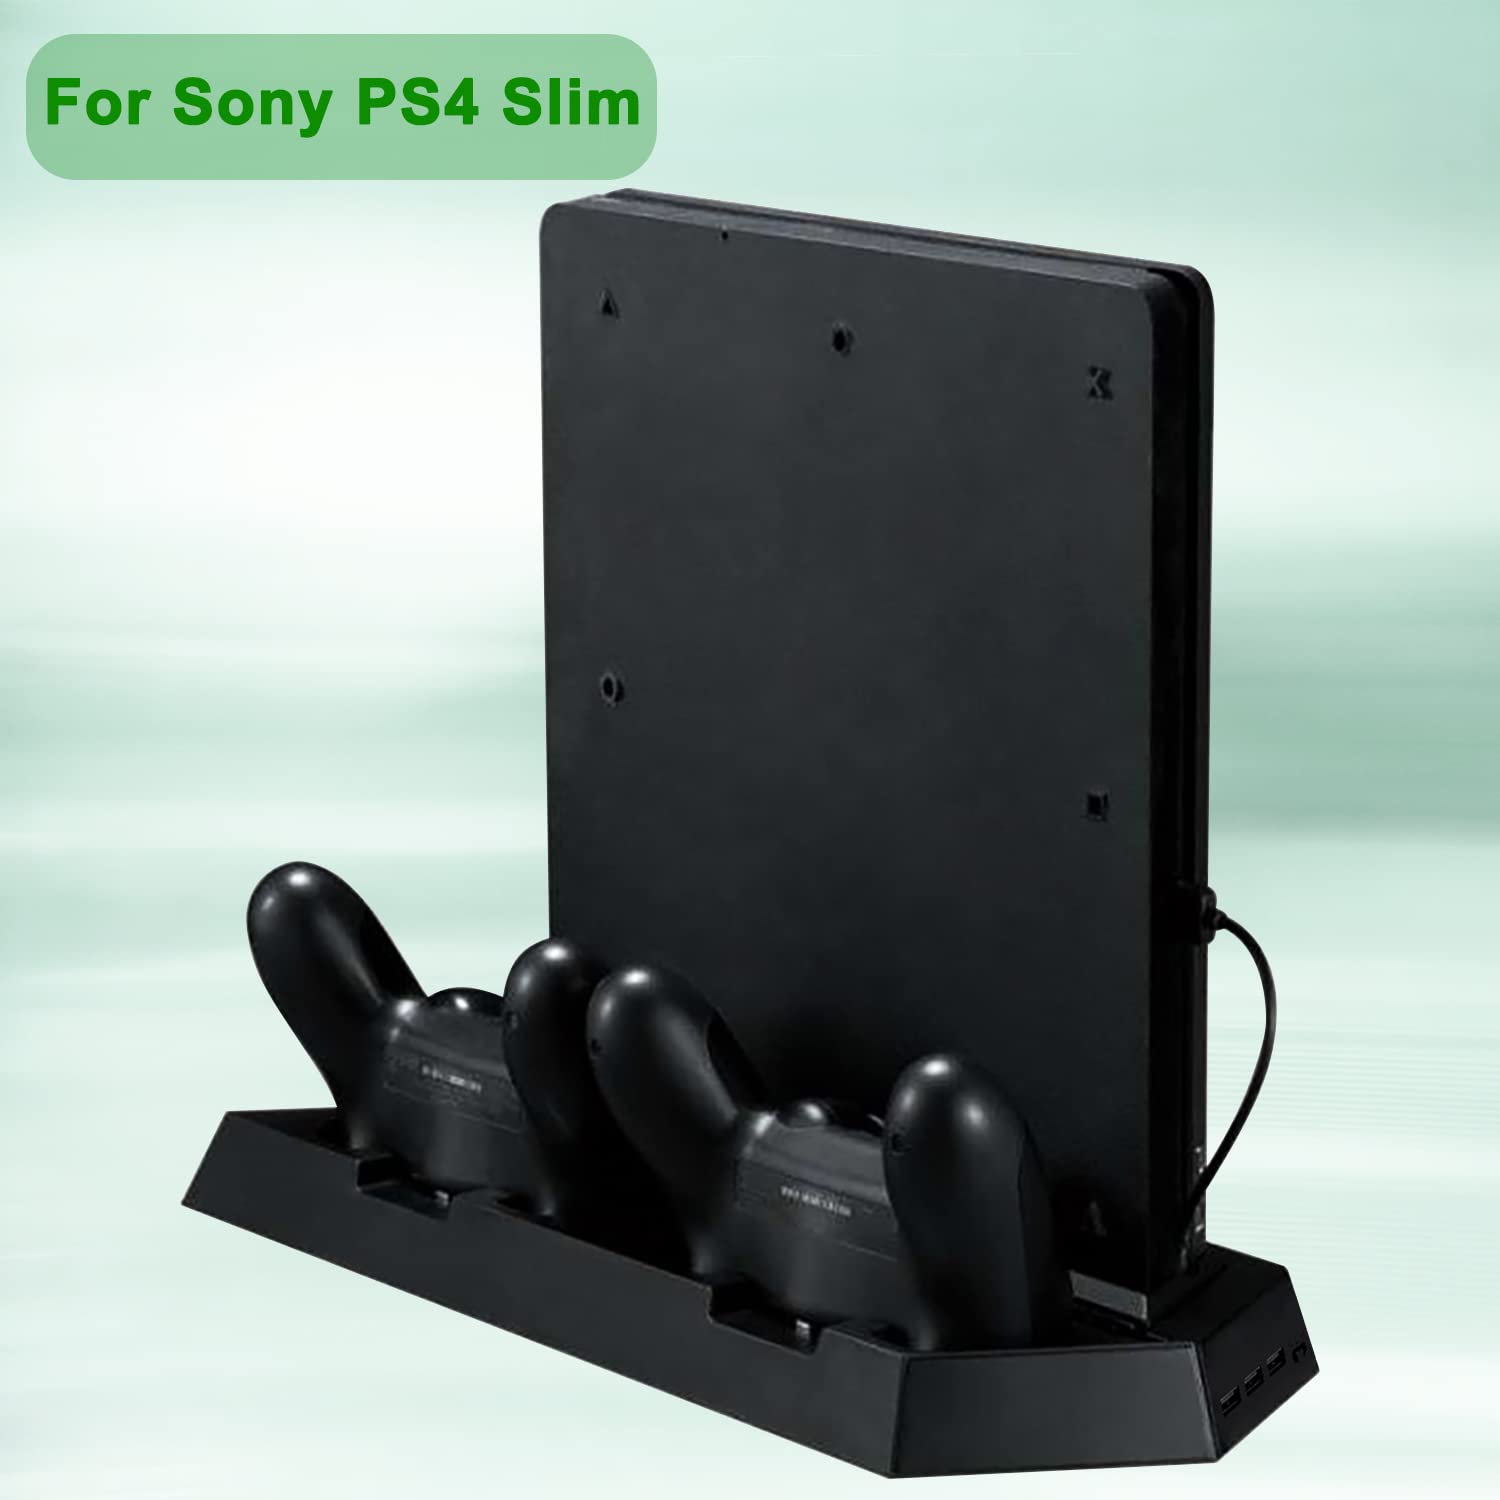 OSTENT Dual Motors Cooling Fan Radiator Charger Station USB Hub Vertical Stand for Sony PS4 / Slim Console